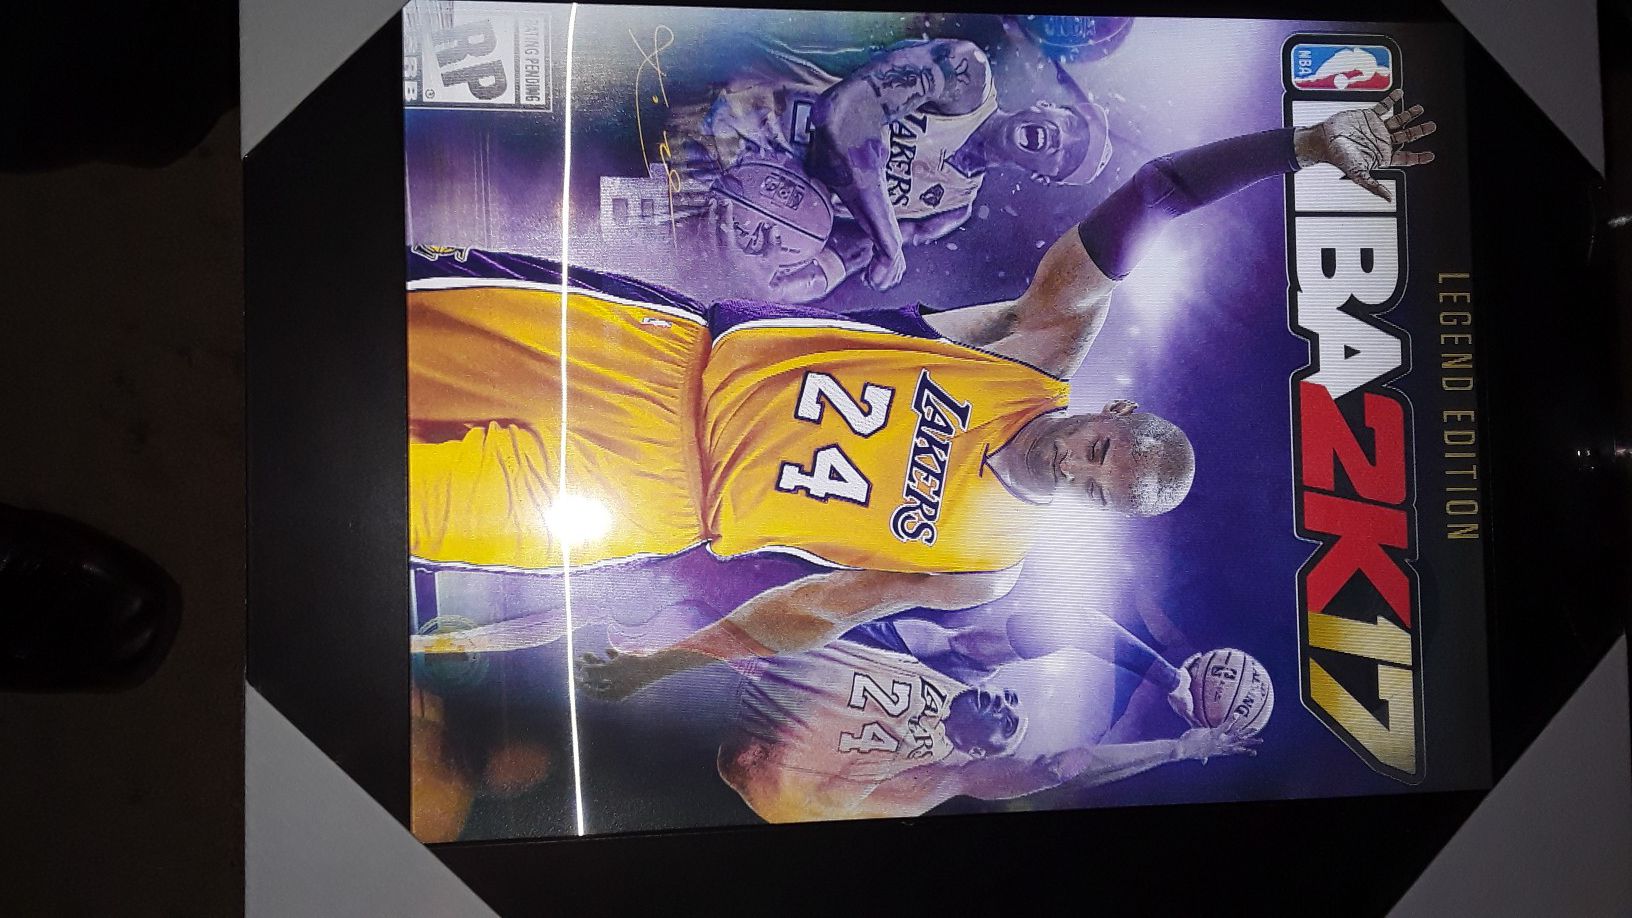 New Kobe Bryant 3-D picture 3 pictures in one $15.00 each